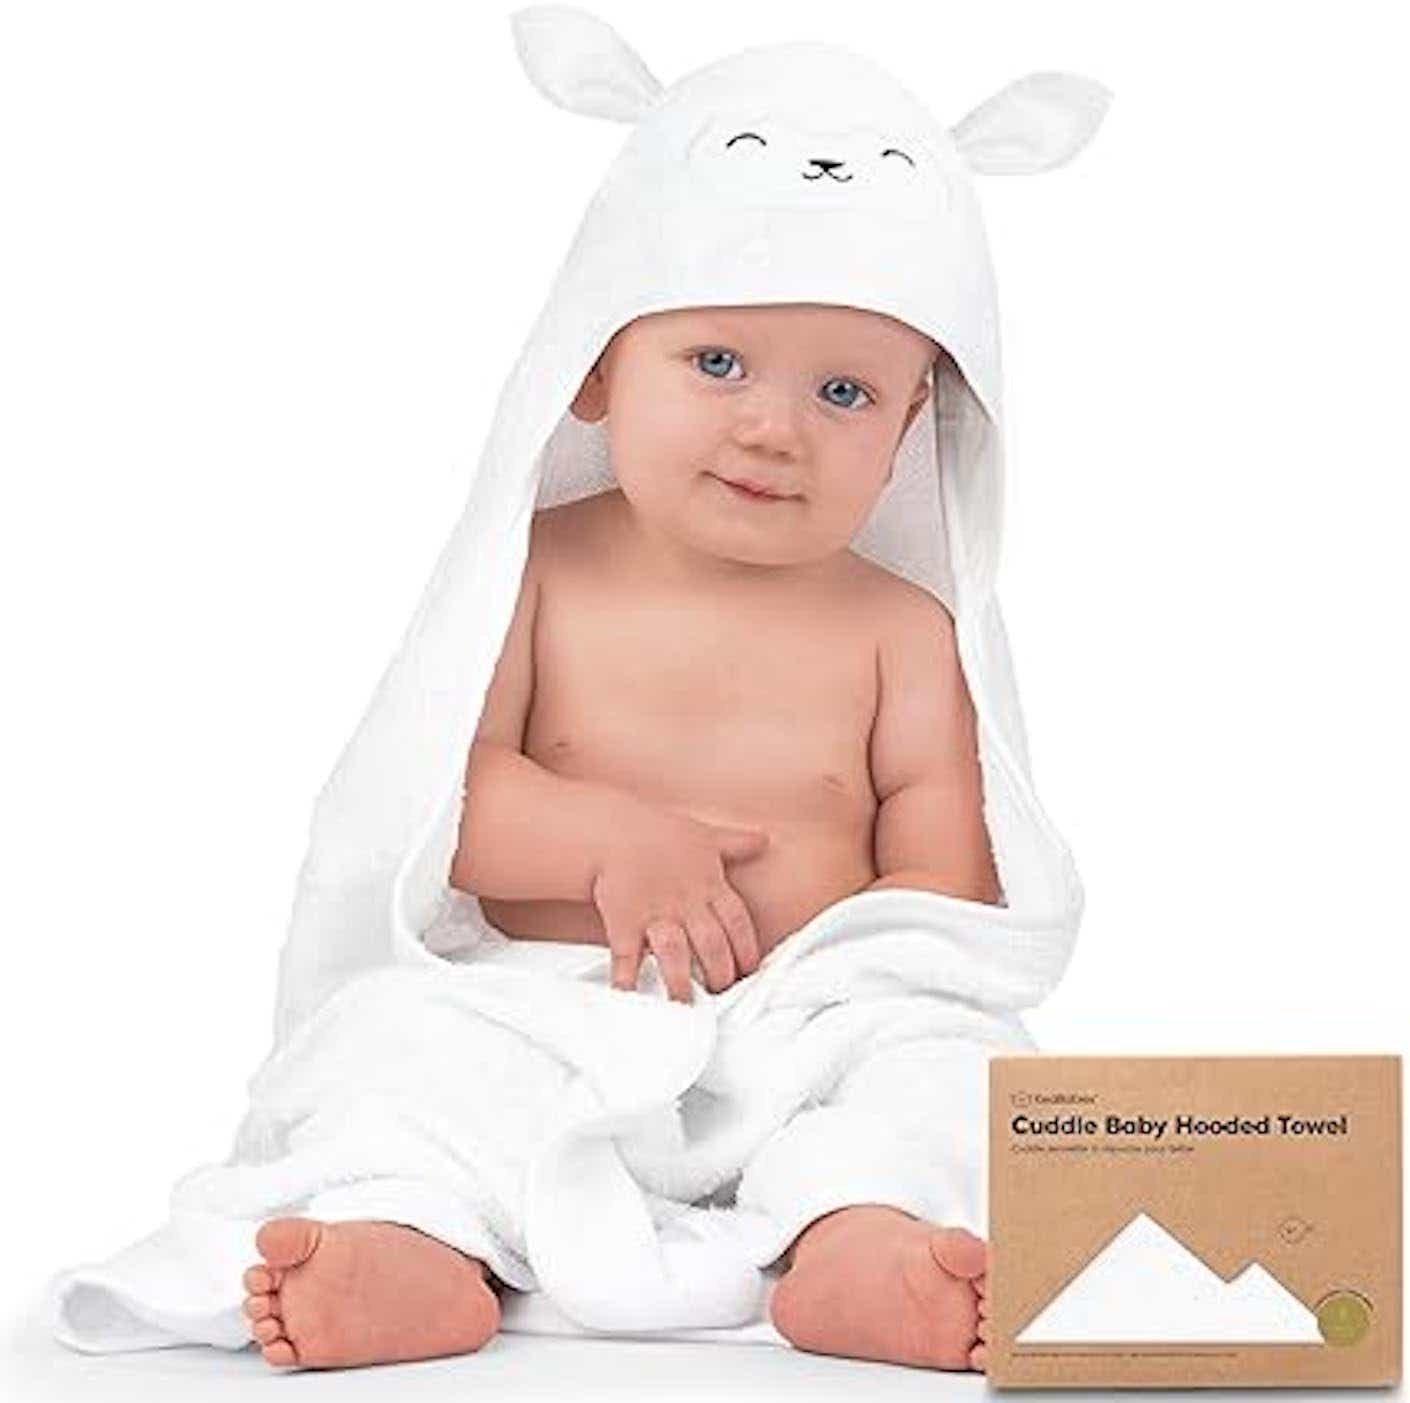 A baby wearing a hooded lamb towel